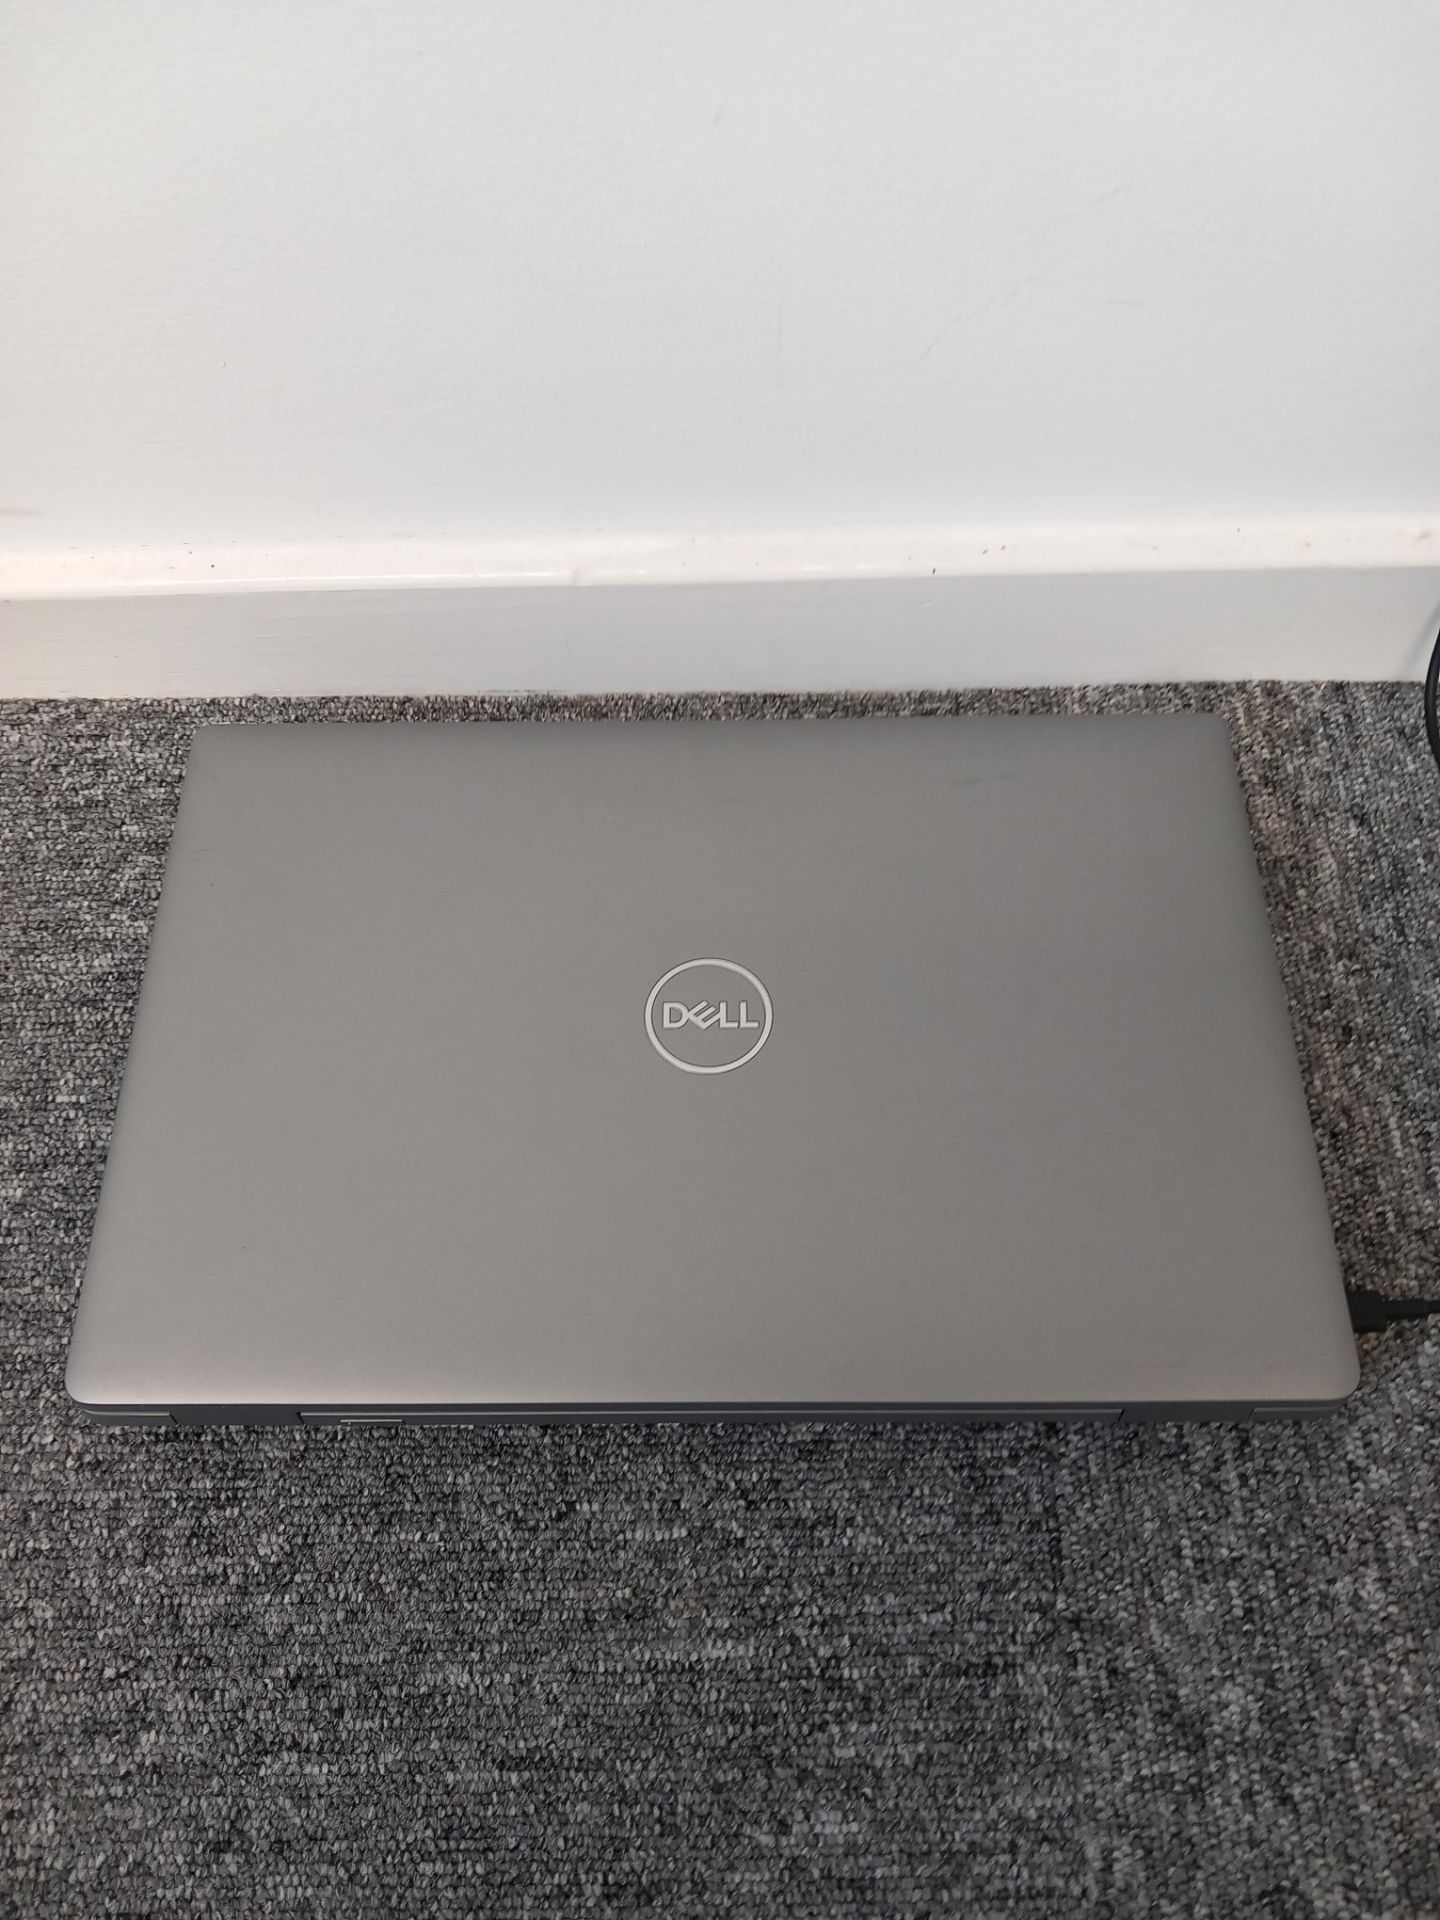 Dell Latitude 5520 Laptop no charger (Located in Stockport)